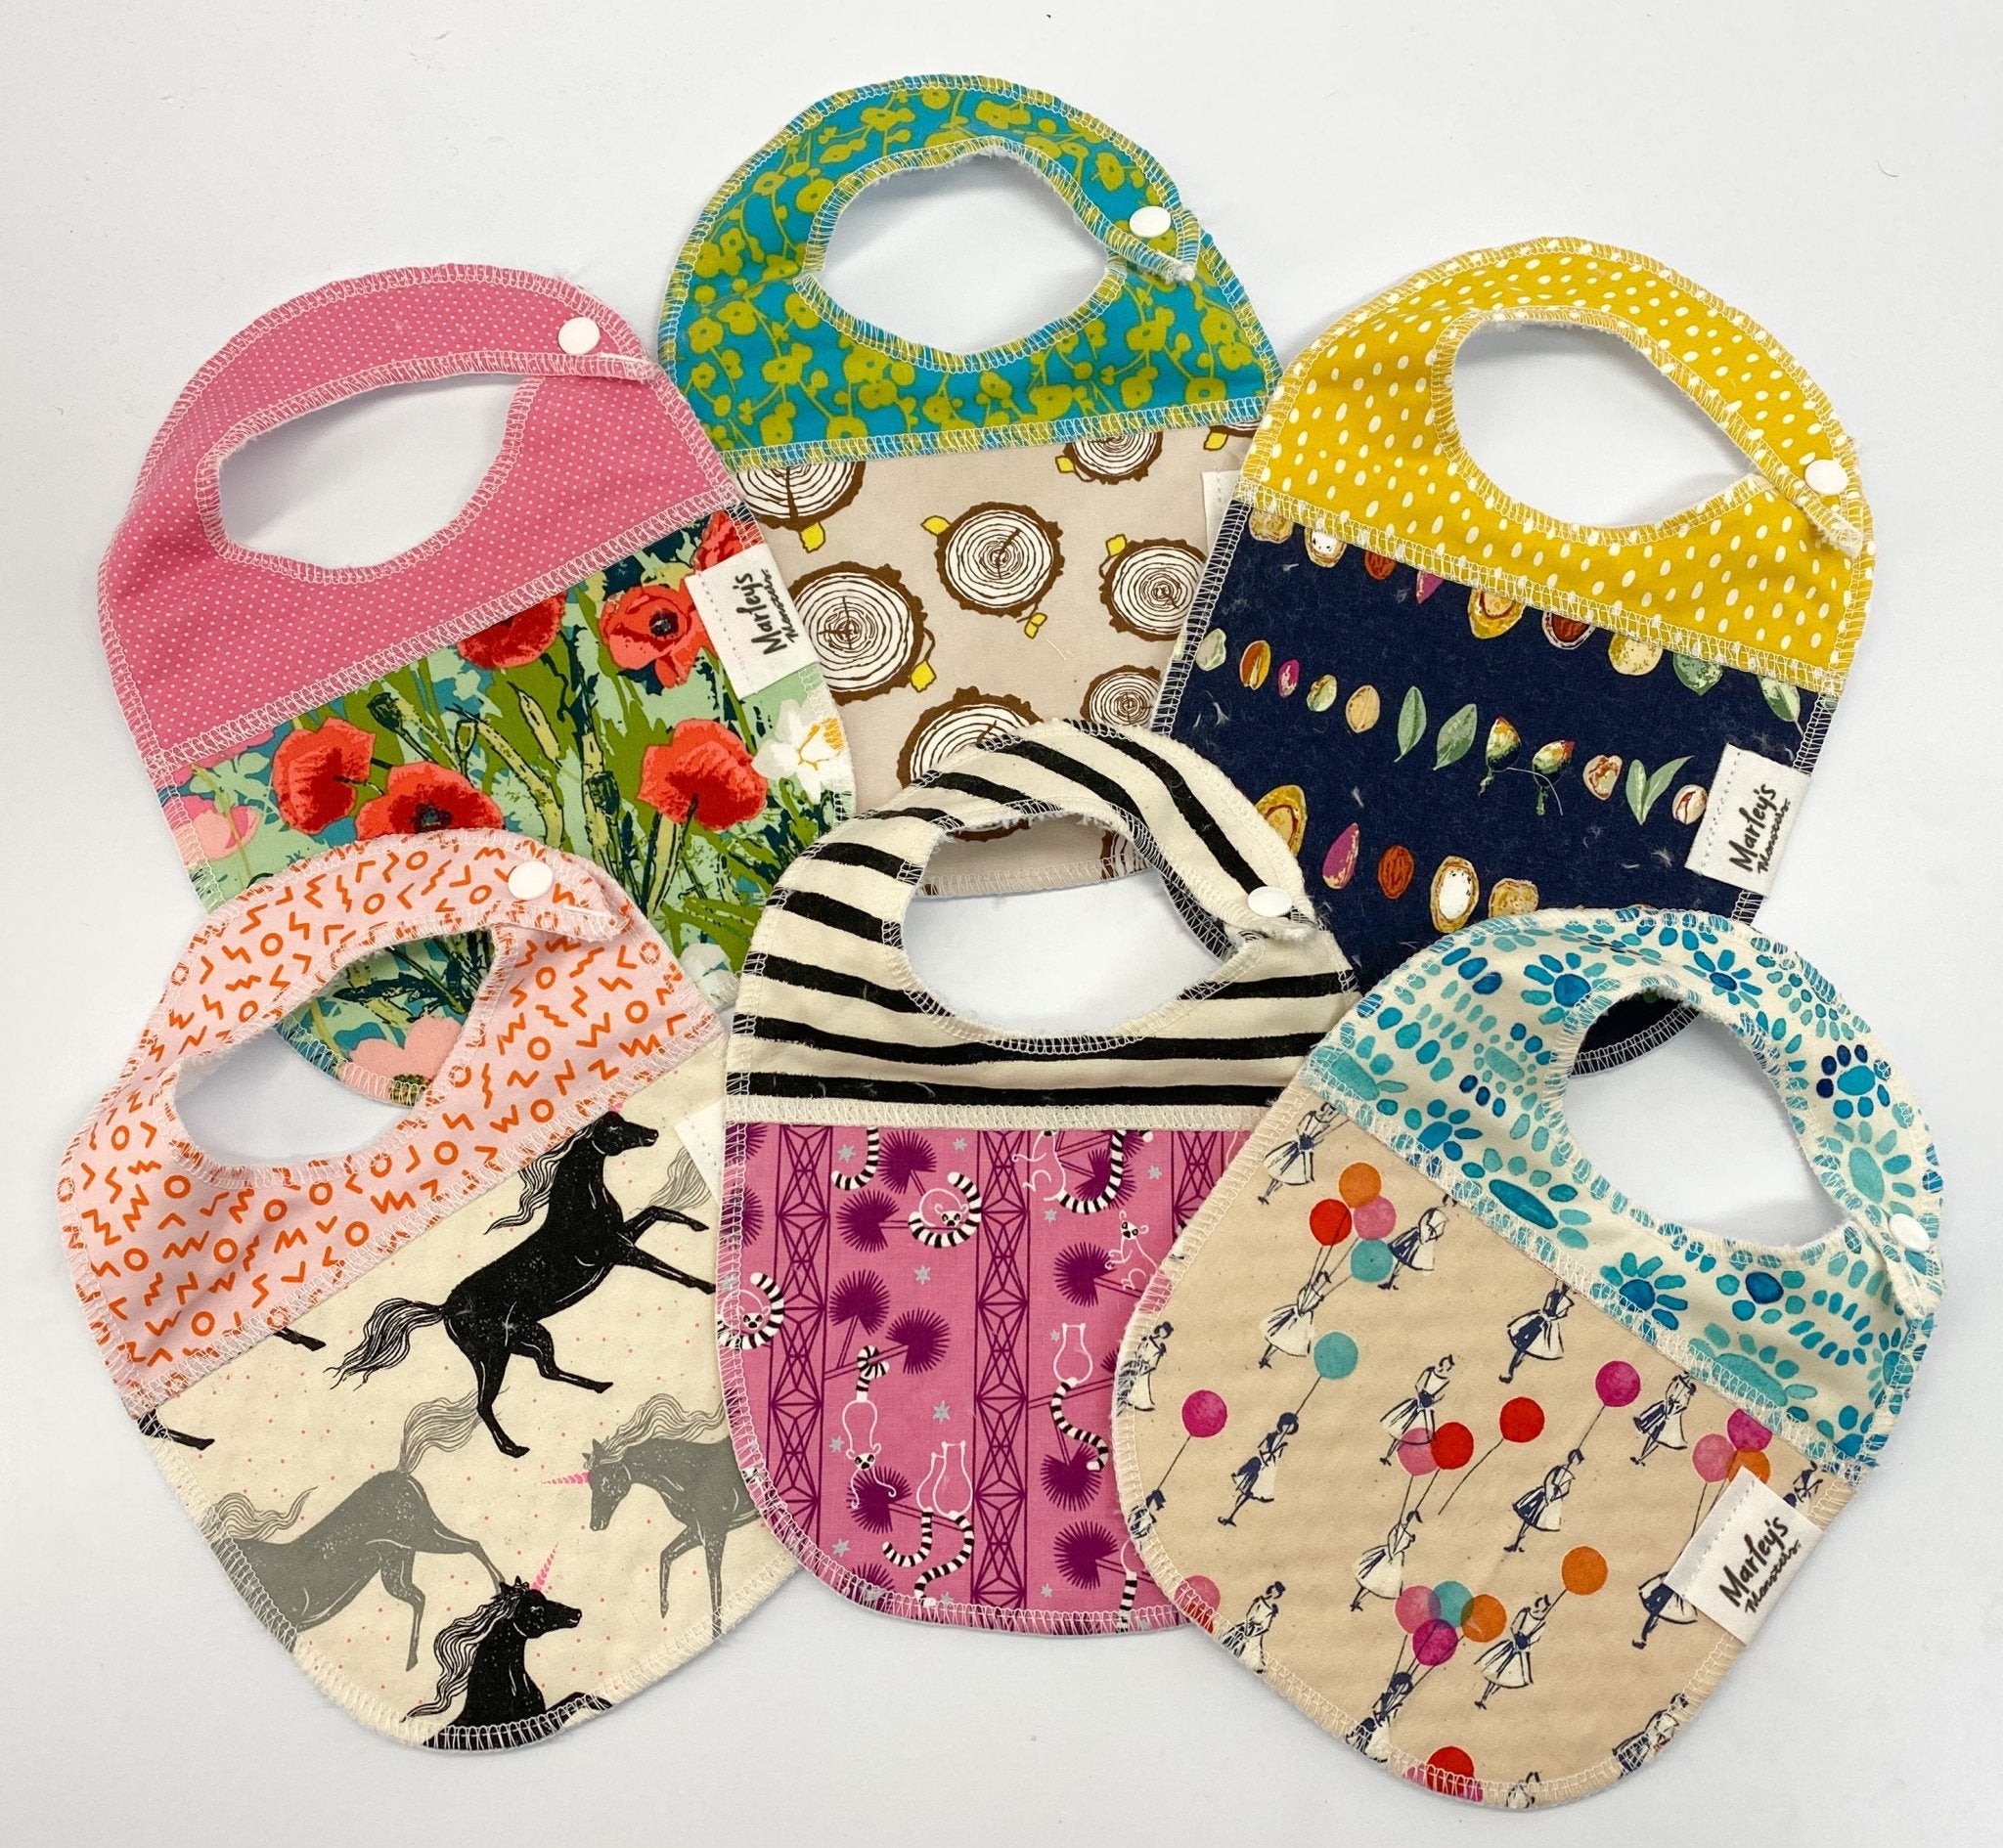 Nursing Pads: 6 Pairs | Marley's Monsters | Eugene, Oregon Stained Glass and Mod Geo Prints